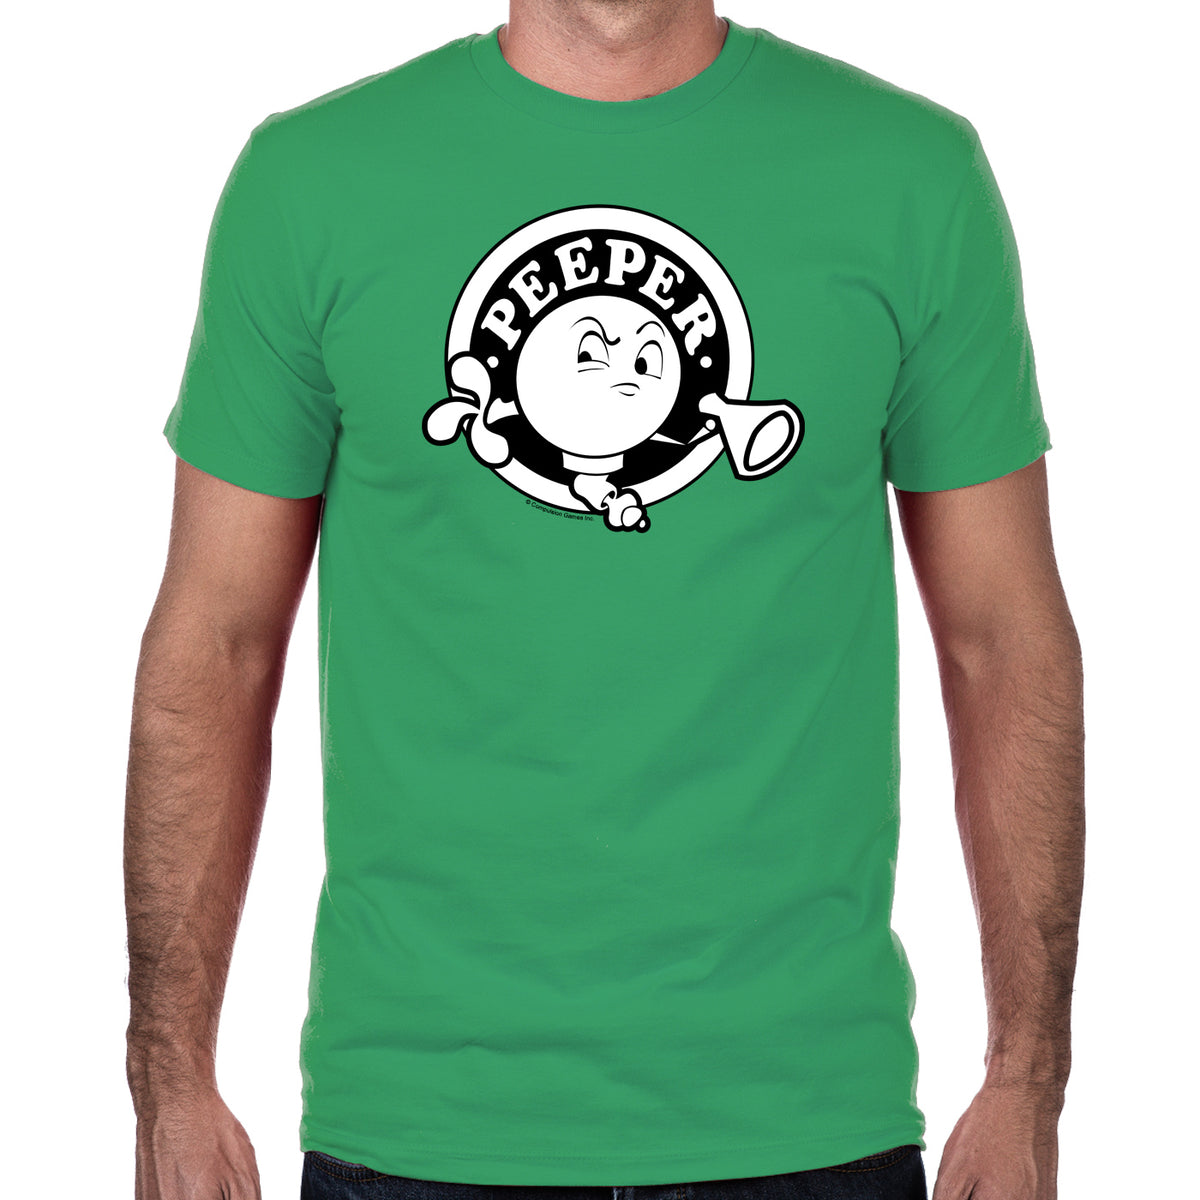 Peeper Men's Fitted T-Shirt